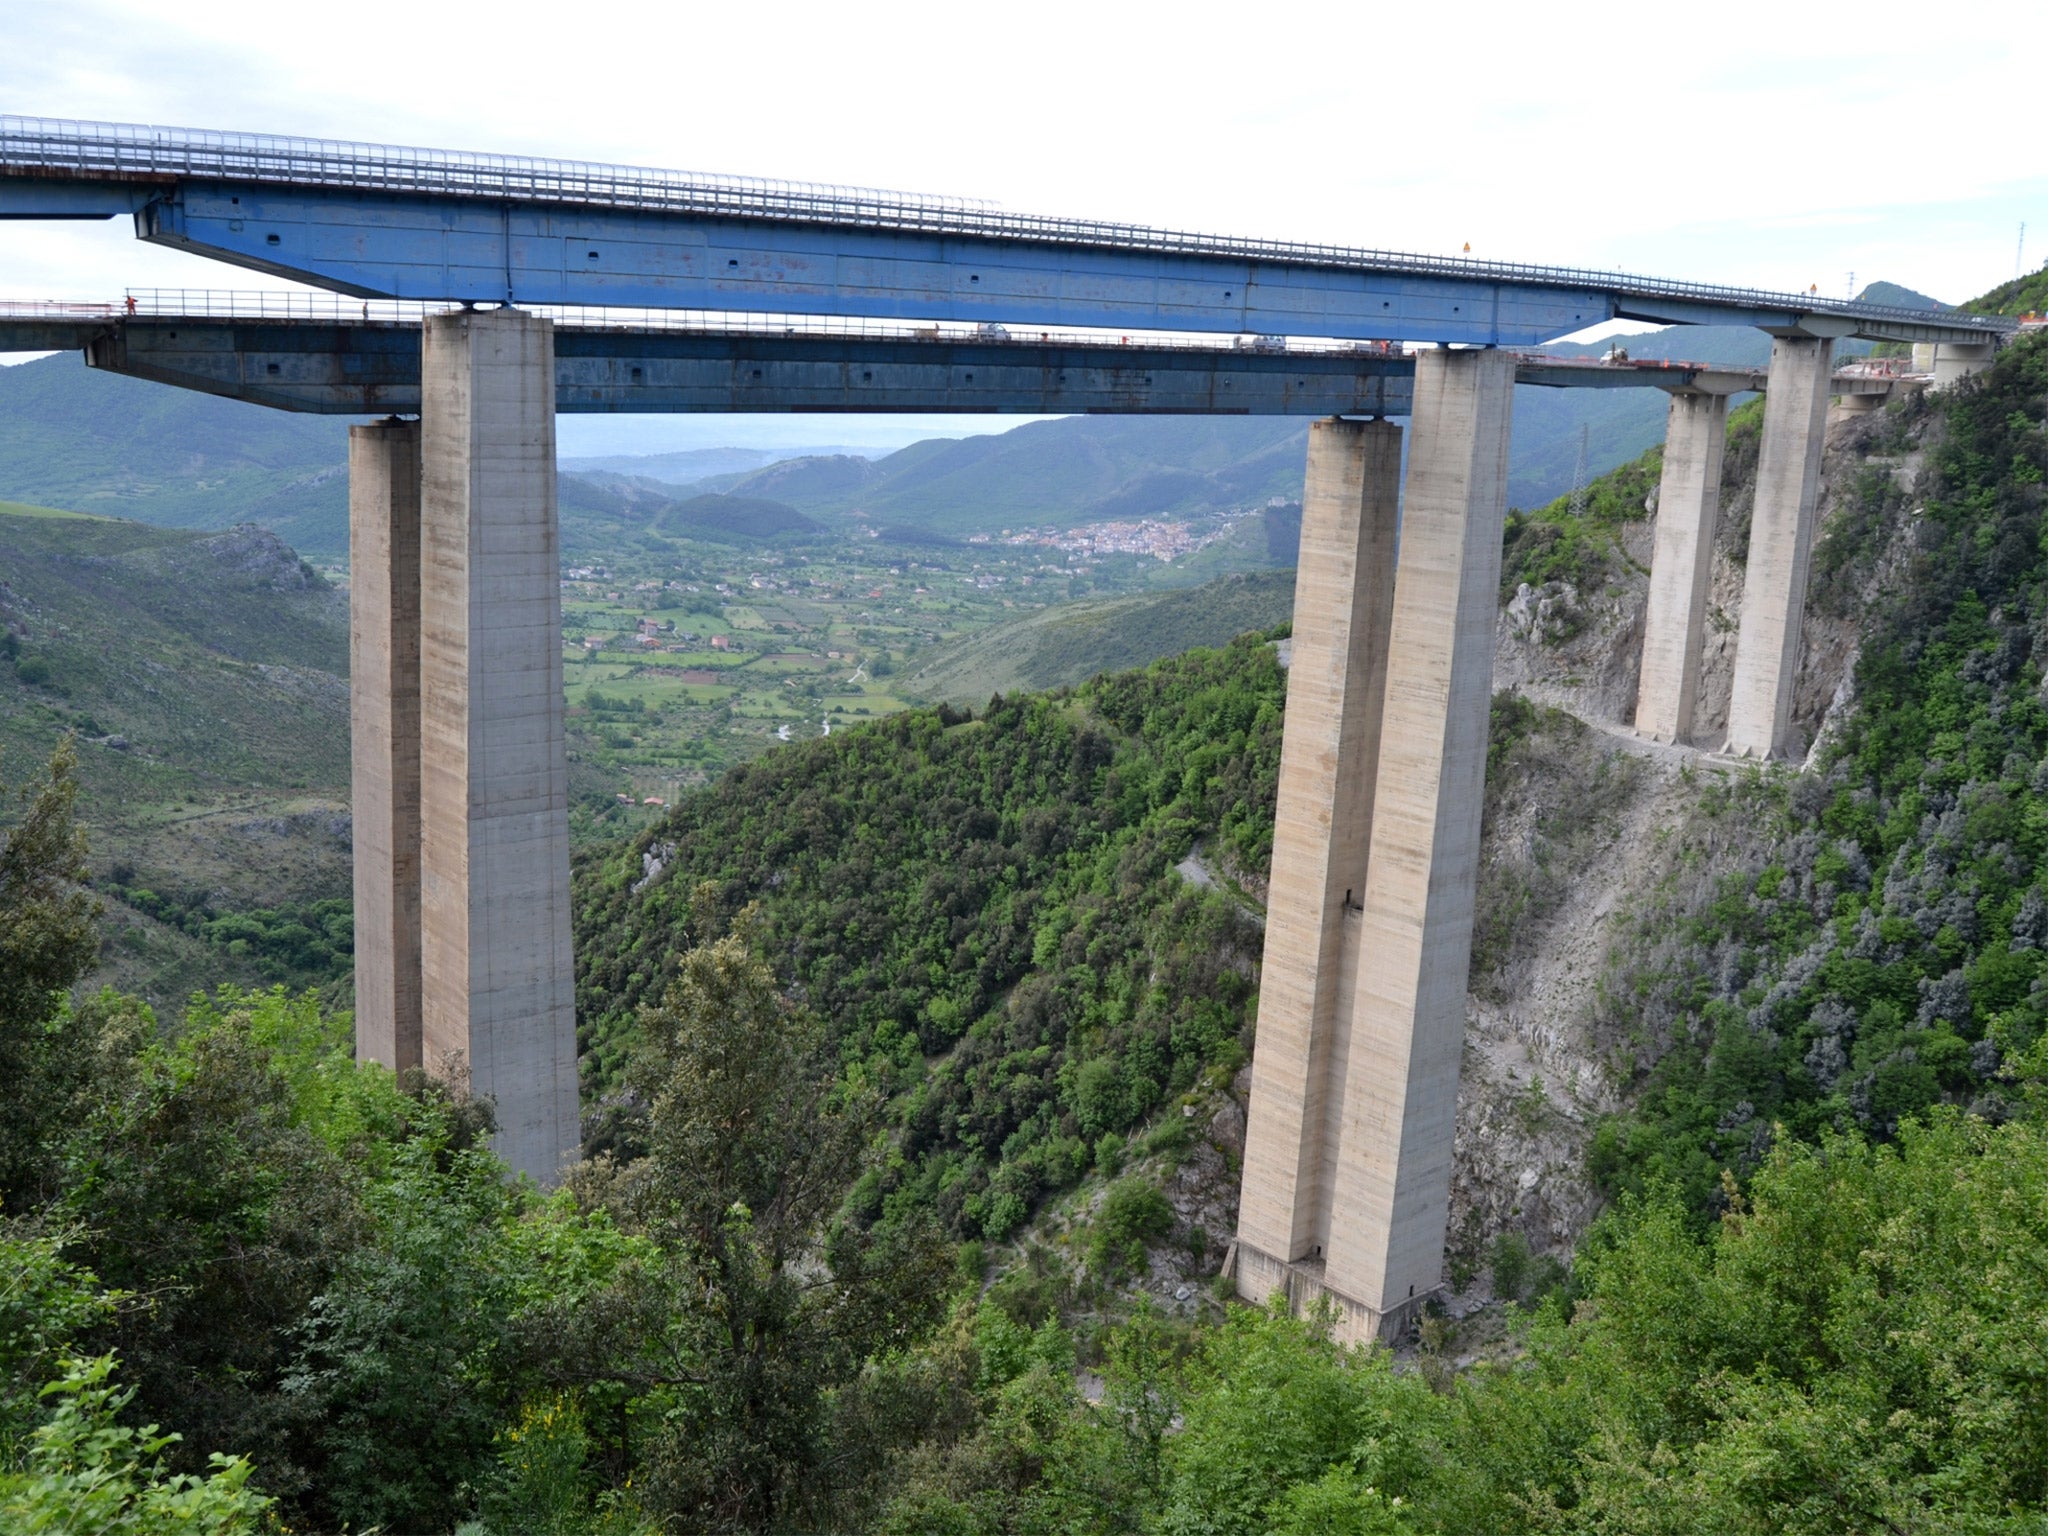 The Rago Viaduct, one of the highest bridges on the A3 highway